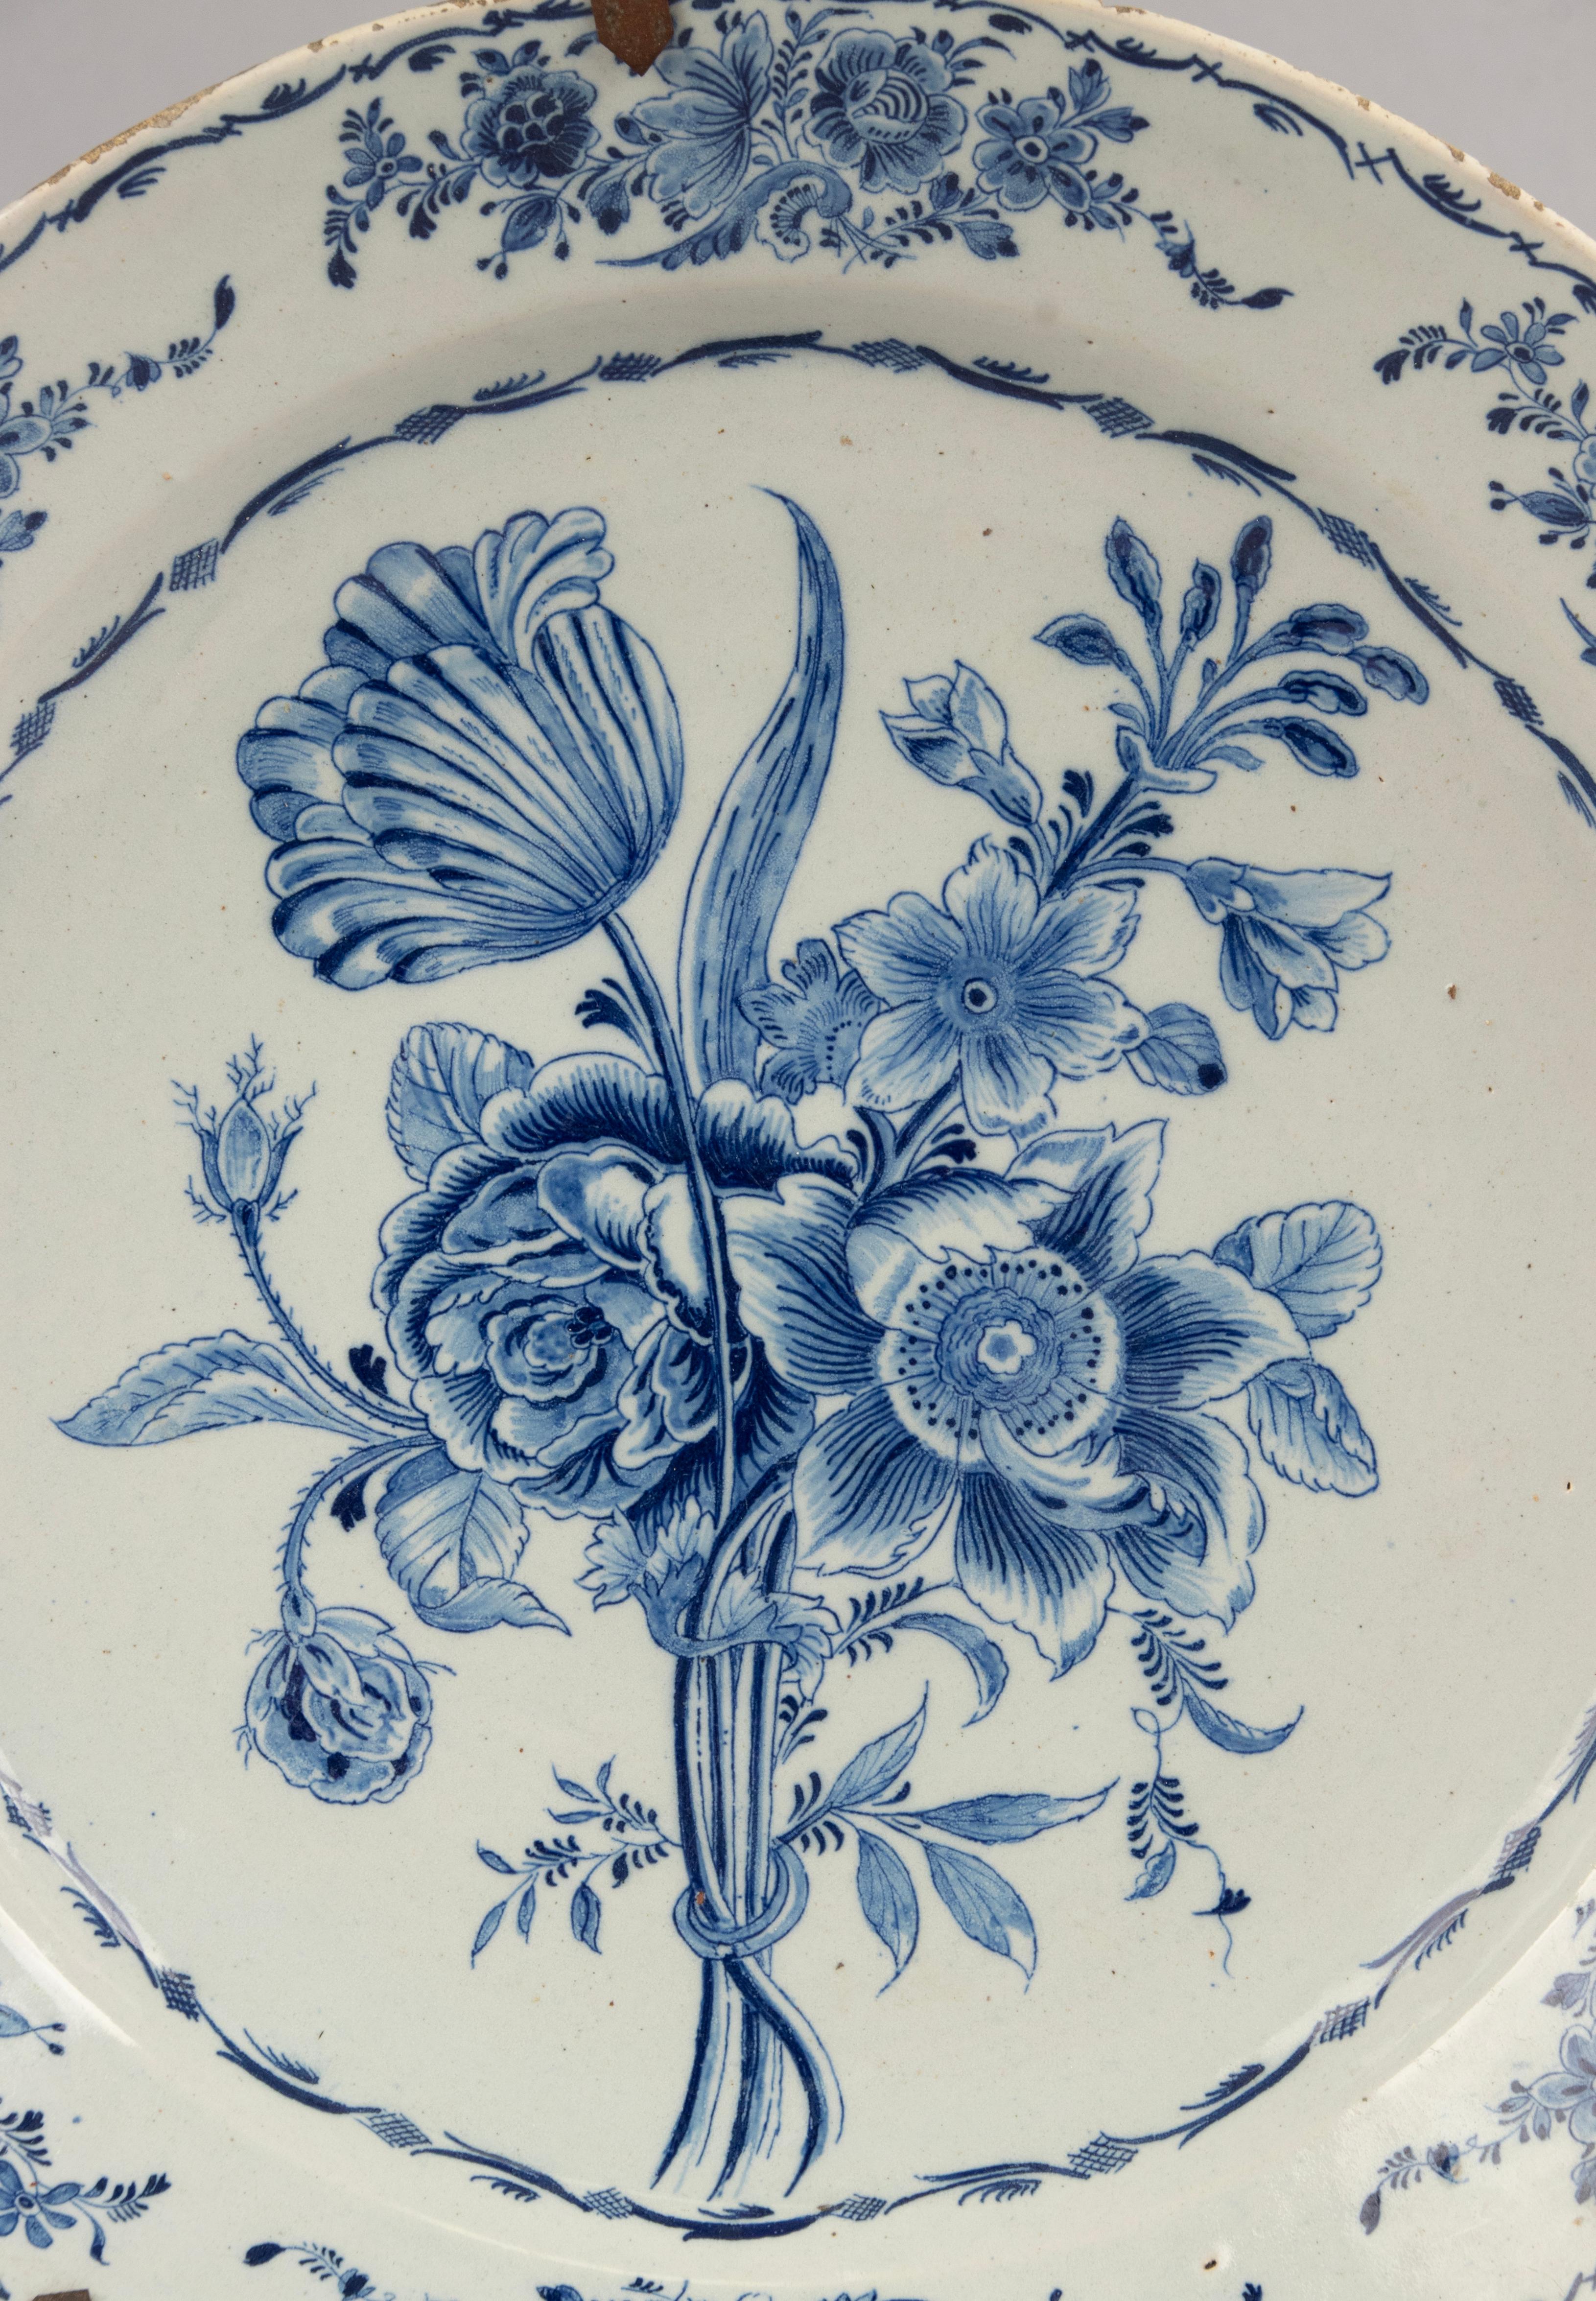 A beautiful 18th century Delft ceramic wall plate. Decorated with flowers. 
The plate is not marked, maker unknown. 
The plate is in good condition with signs of use, some wear at the glaze on the borders.

Dimensions: the plate is Ø34,5 cm 
Free